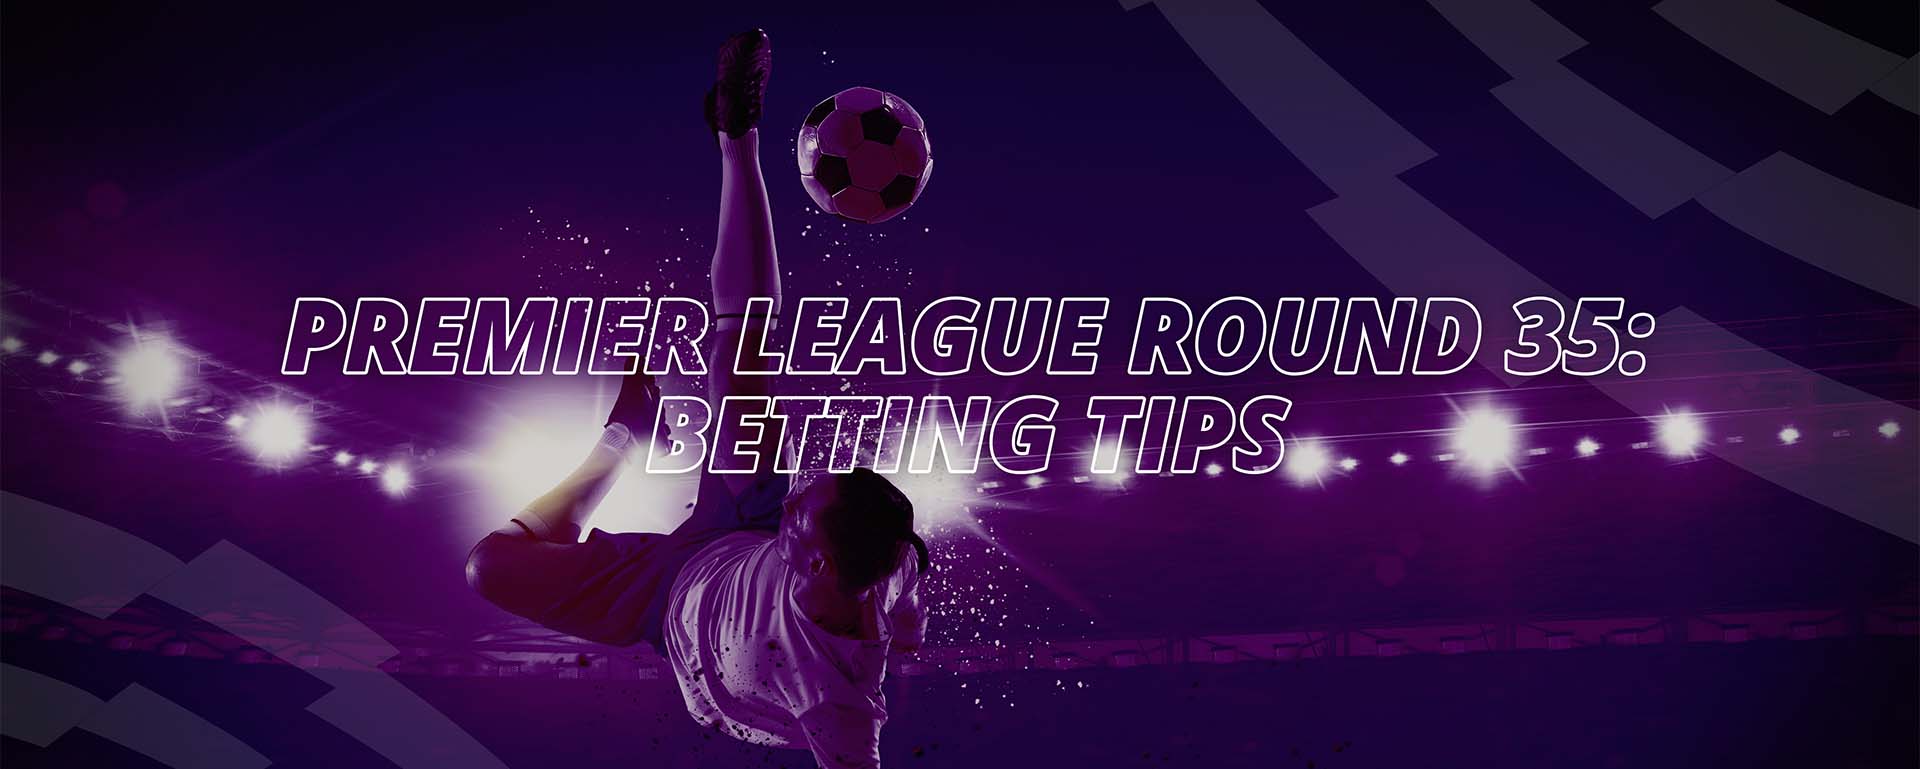 PREMIER LEAGUE ROUND 35: BETTING TIPS